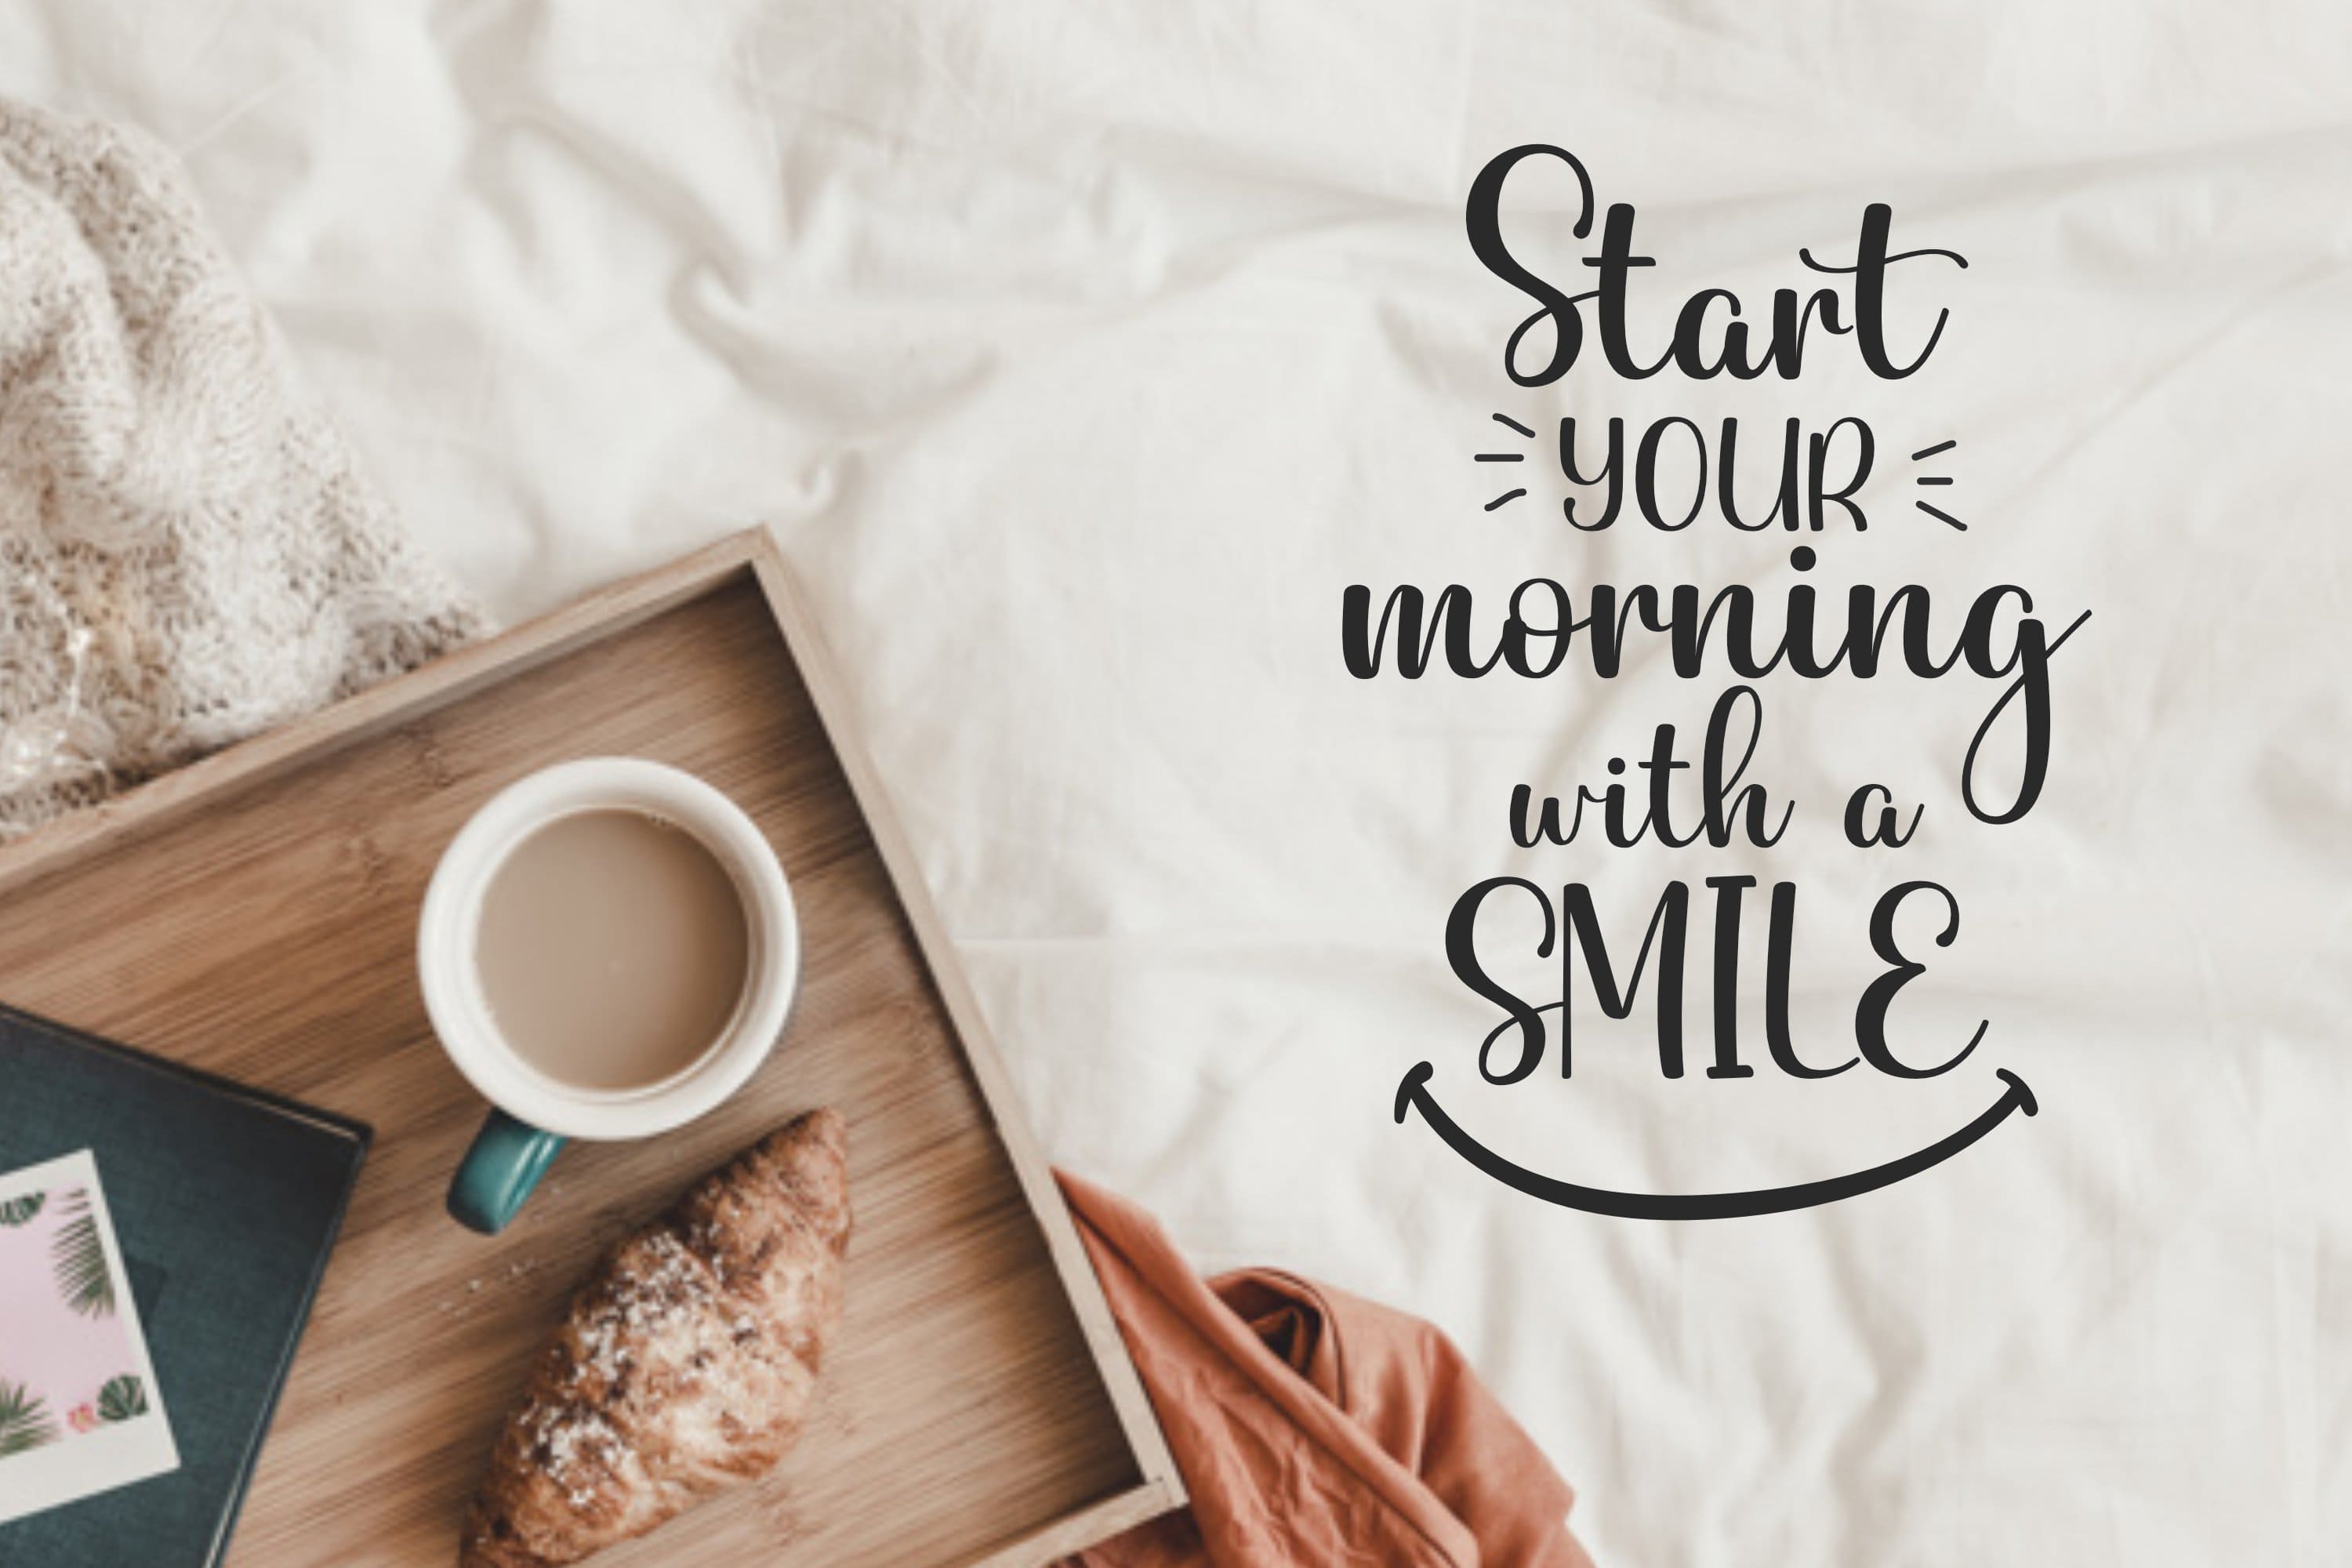 Inscription: Start your morning with a Smile.